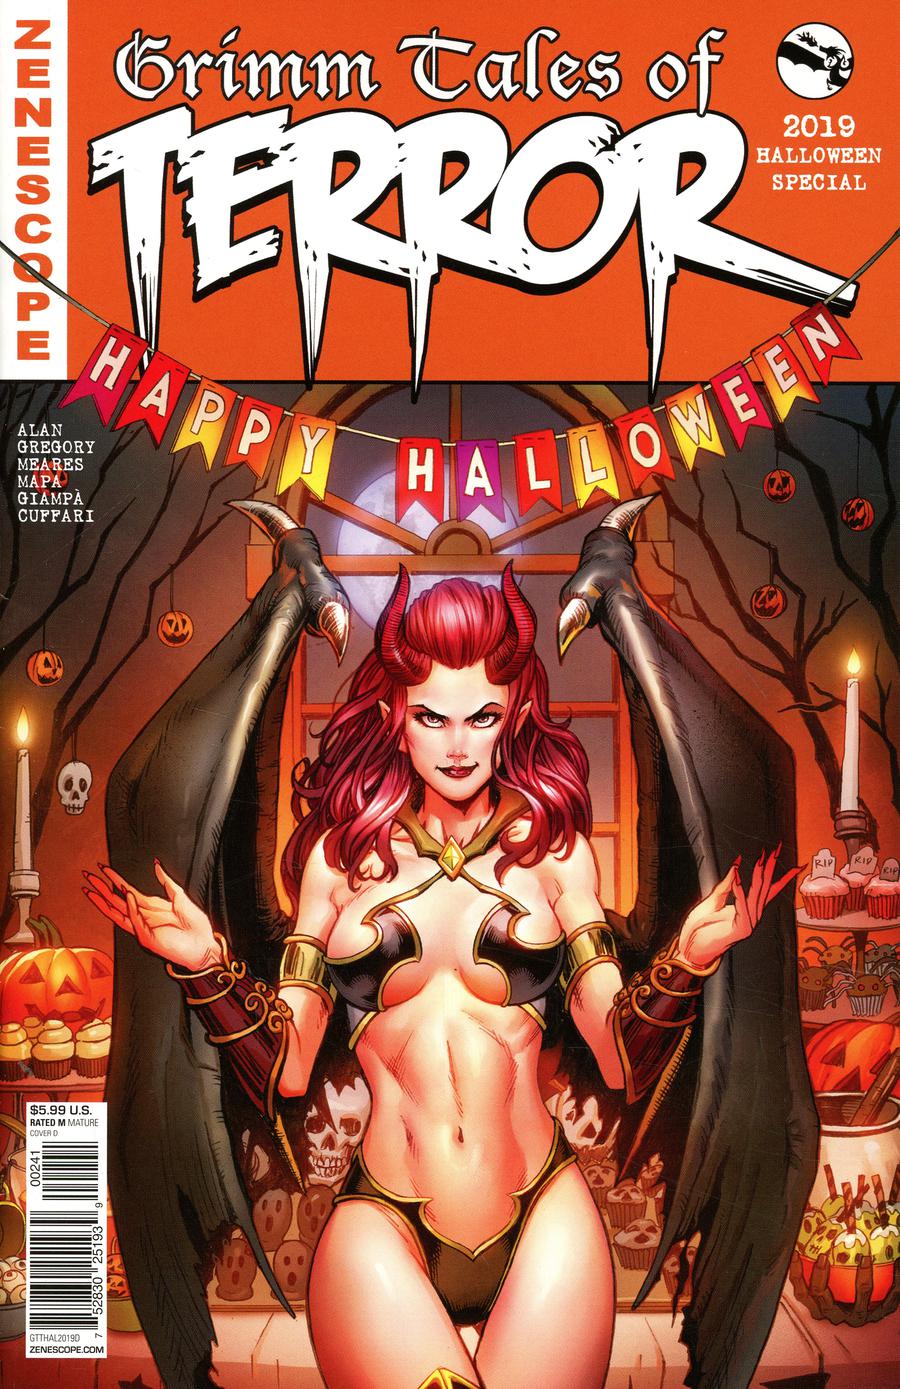 Grimm Fairy Tales Presents Grimm Tales Of Terror 2019 Halloween Edition #1 Cover D Alfredo Reyes